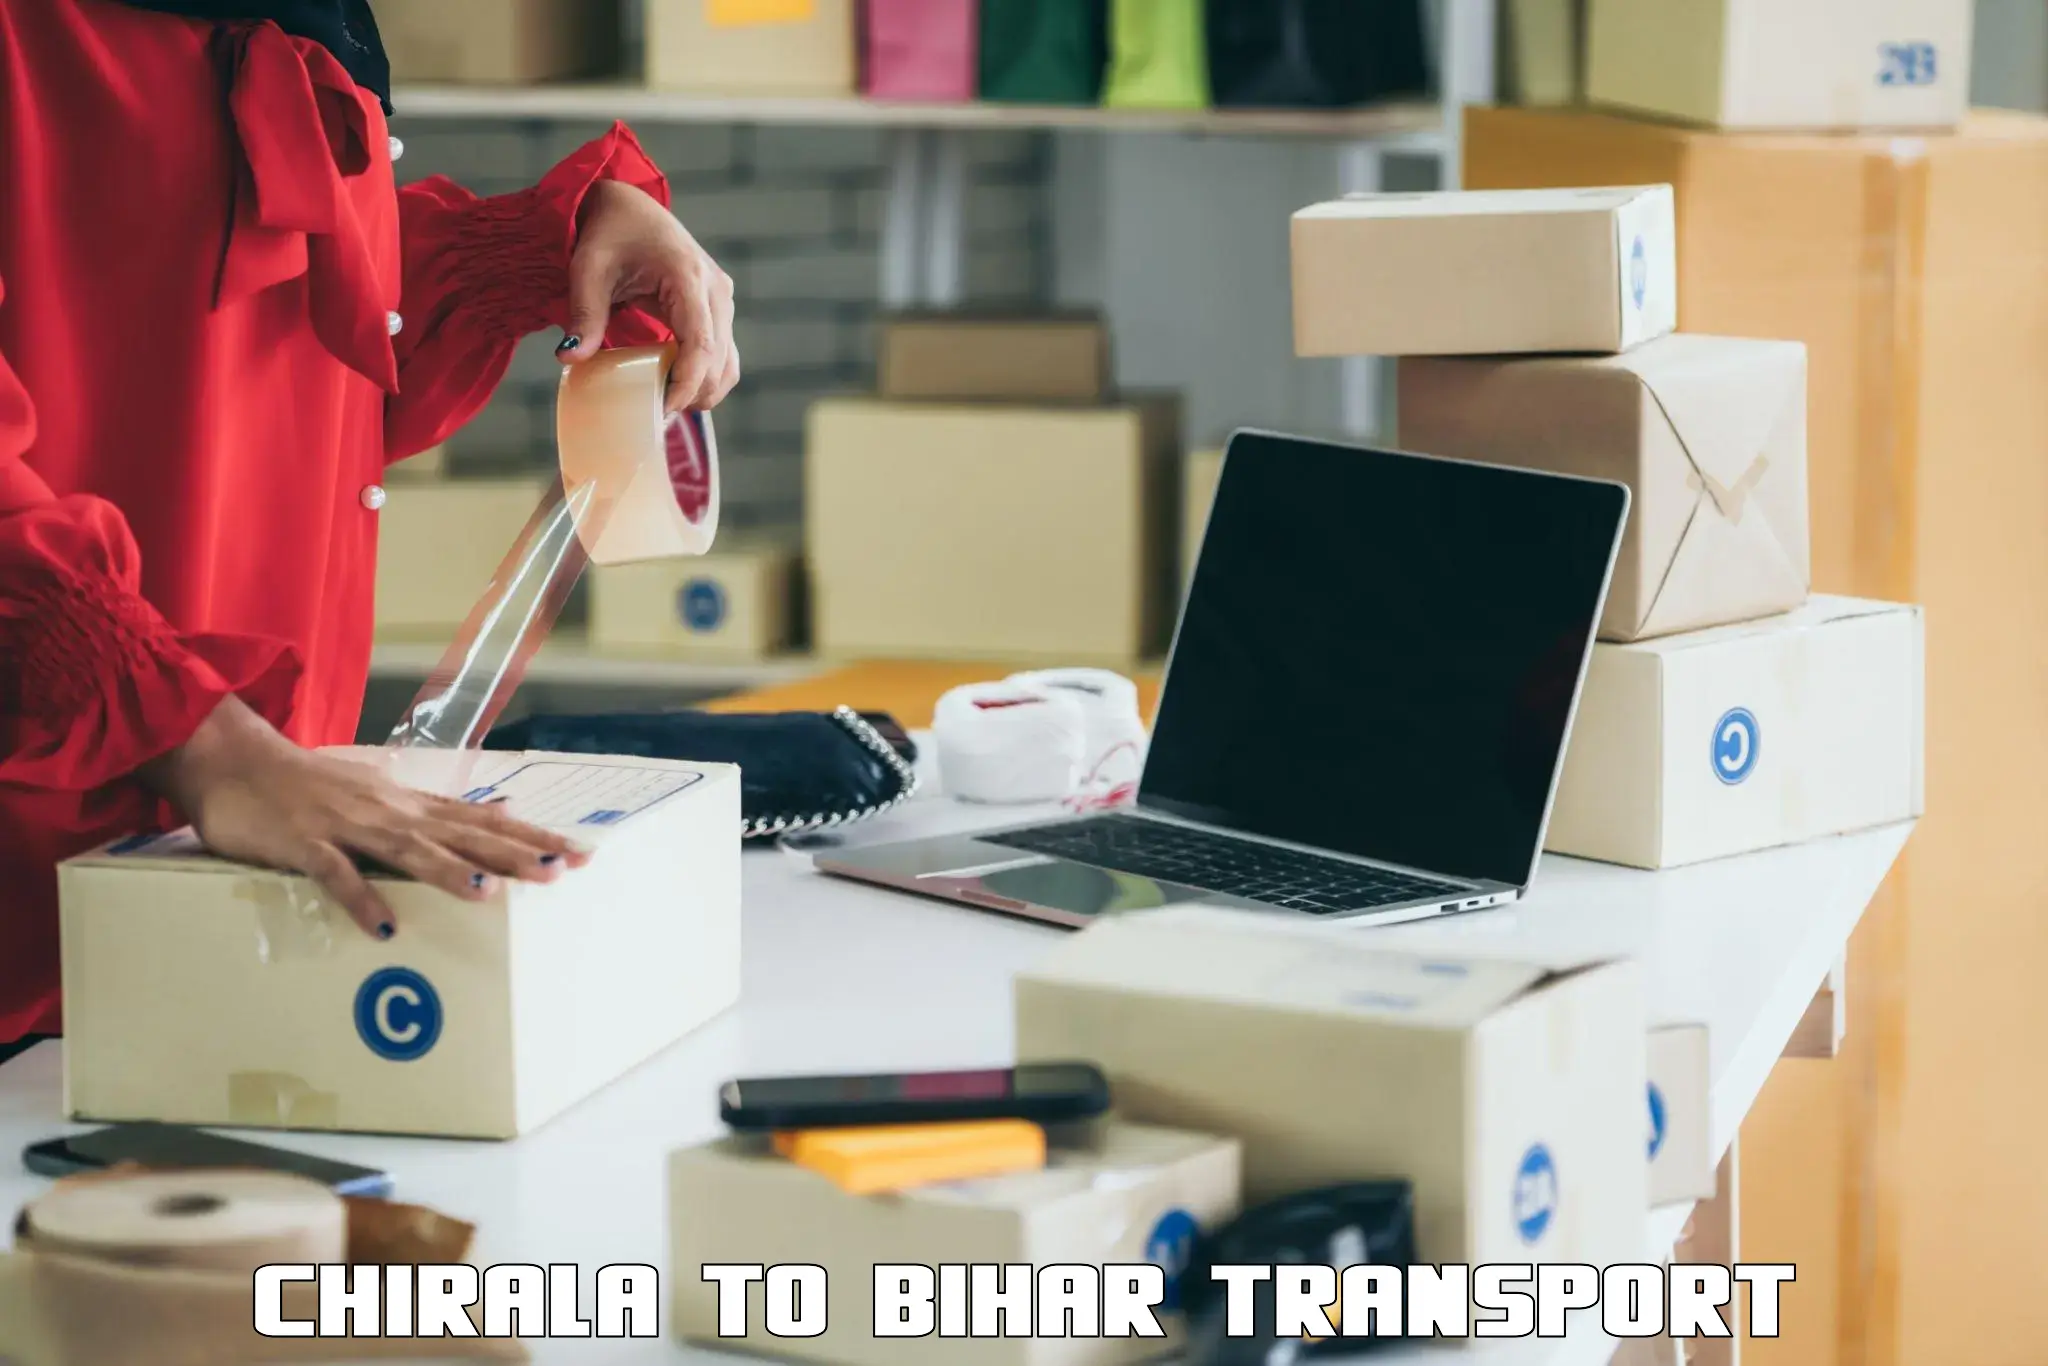 Best transport services in India Chirala to Baisi